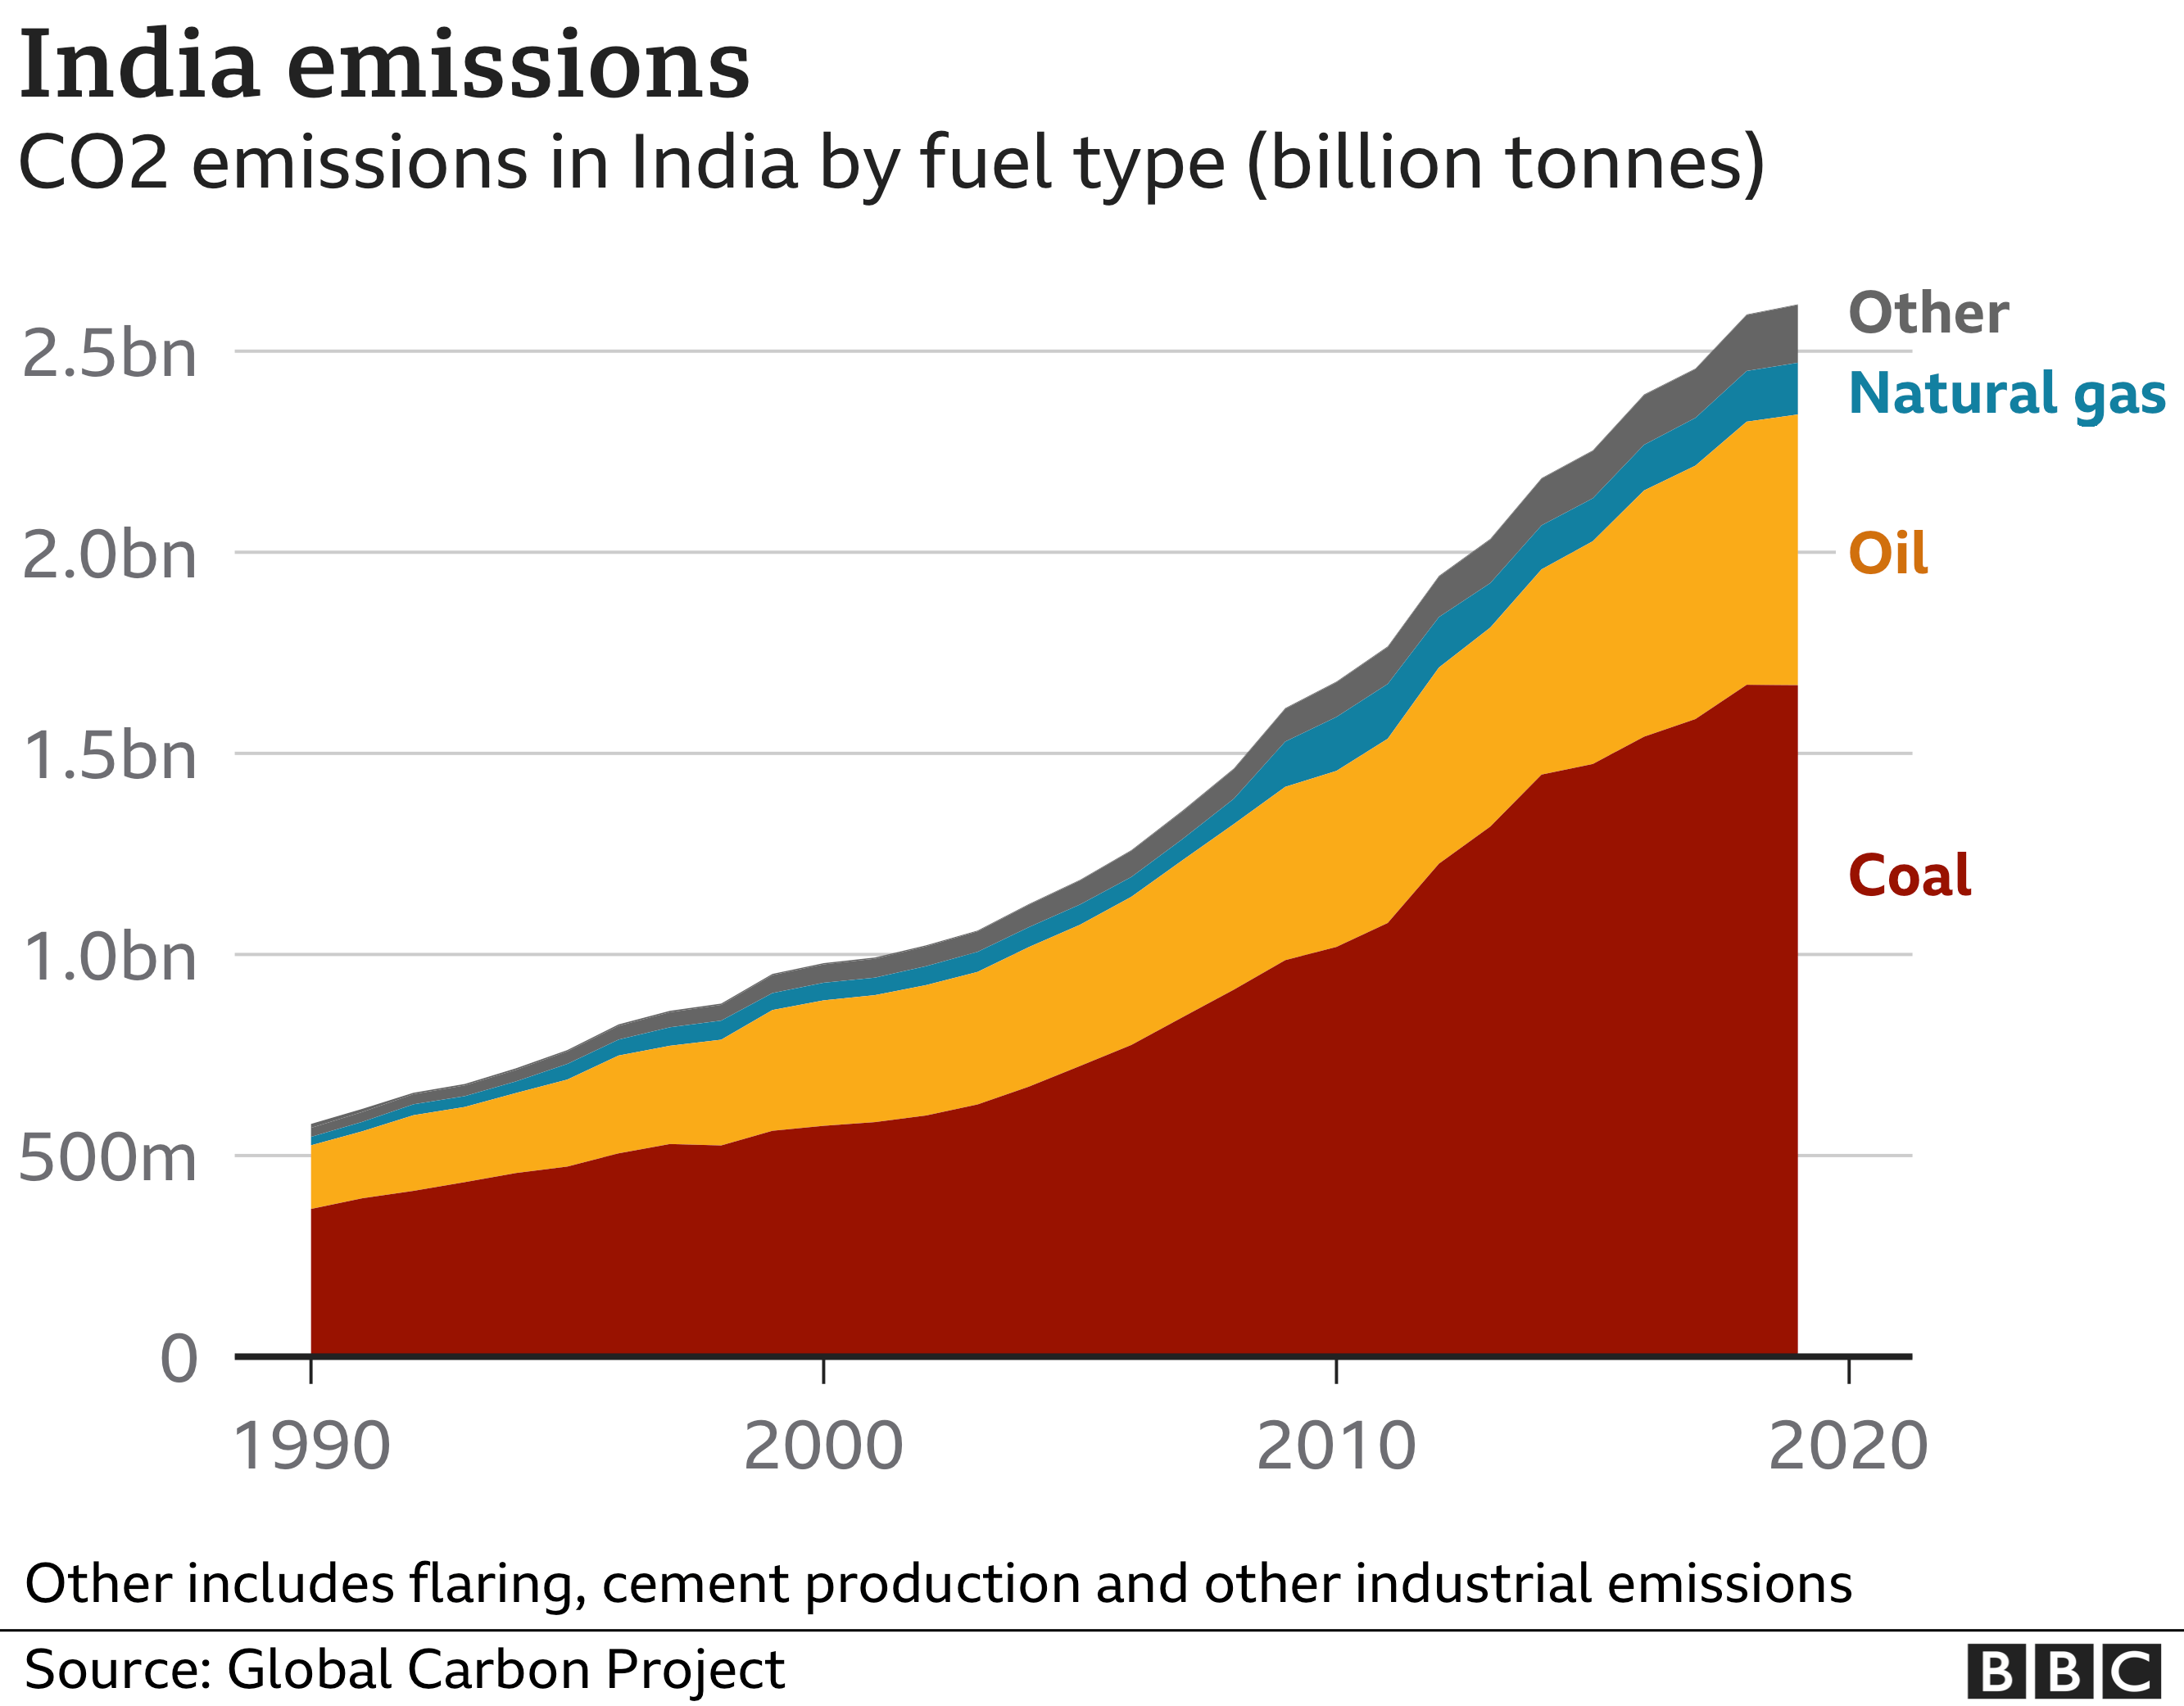 Chart showing CO2 emissions by fuel type in India